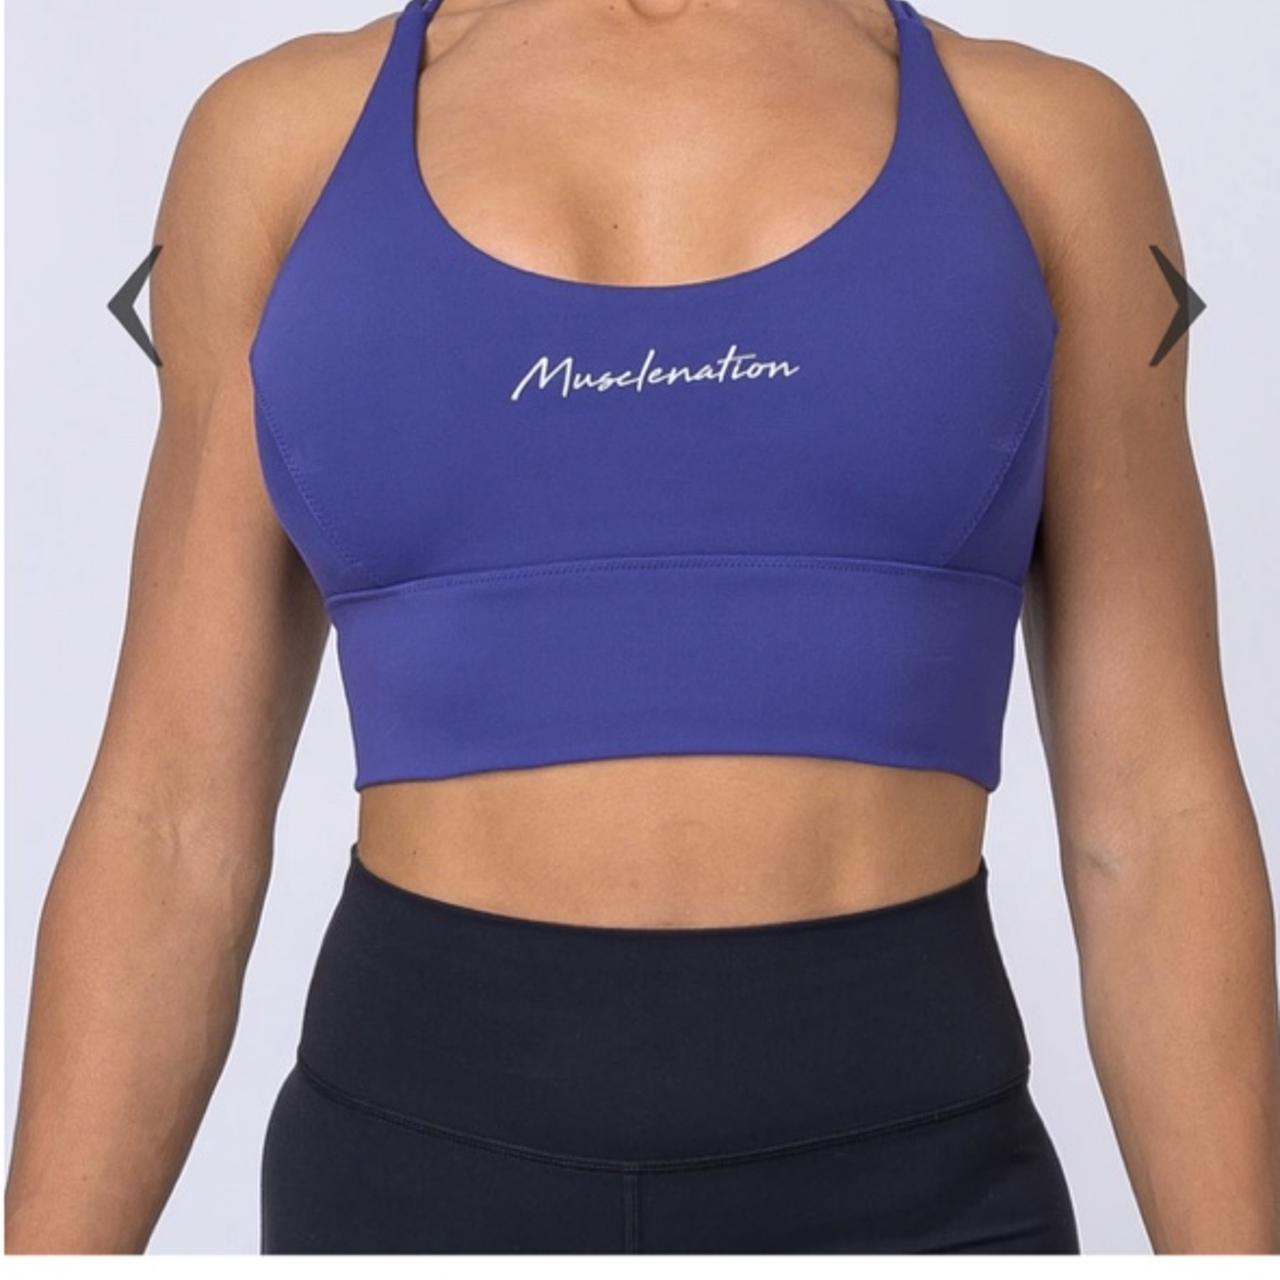 Muscle Nation - Butter Motion sports bra , Amazing